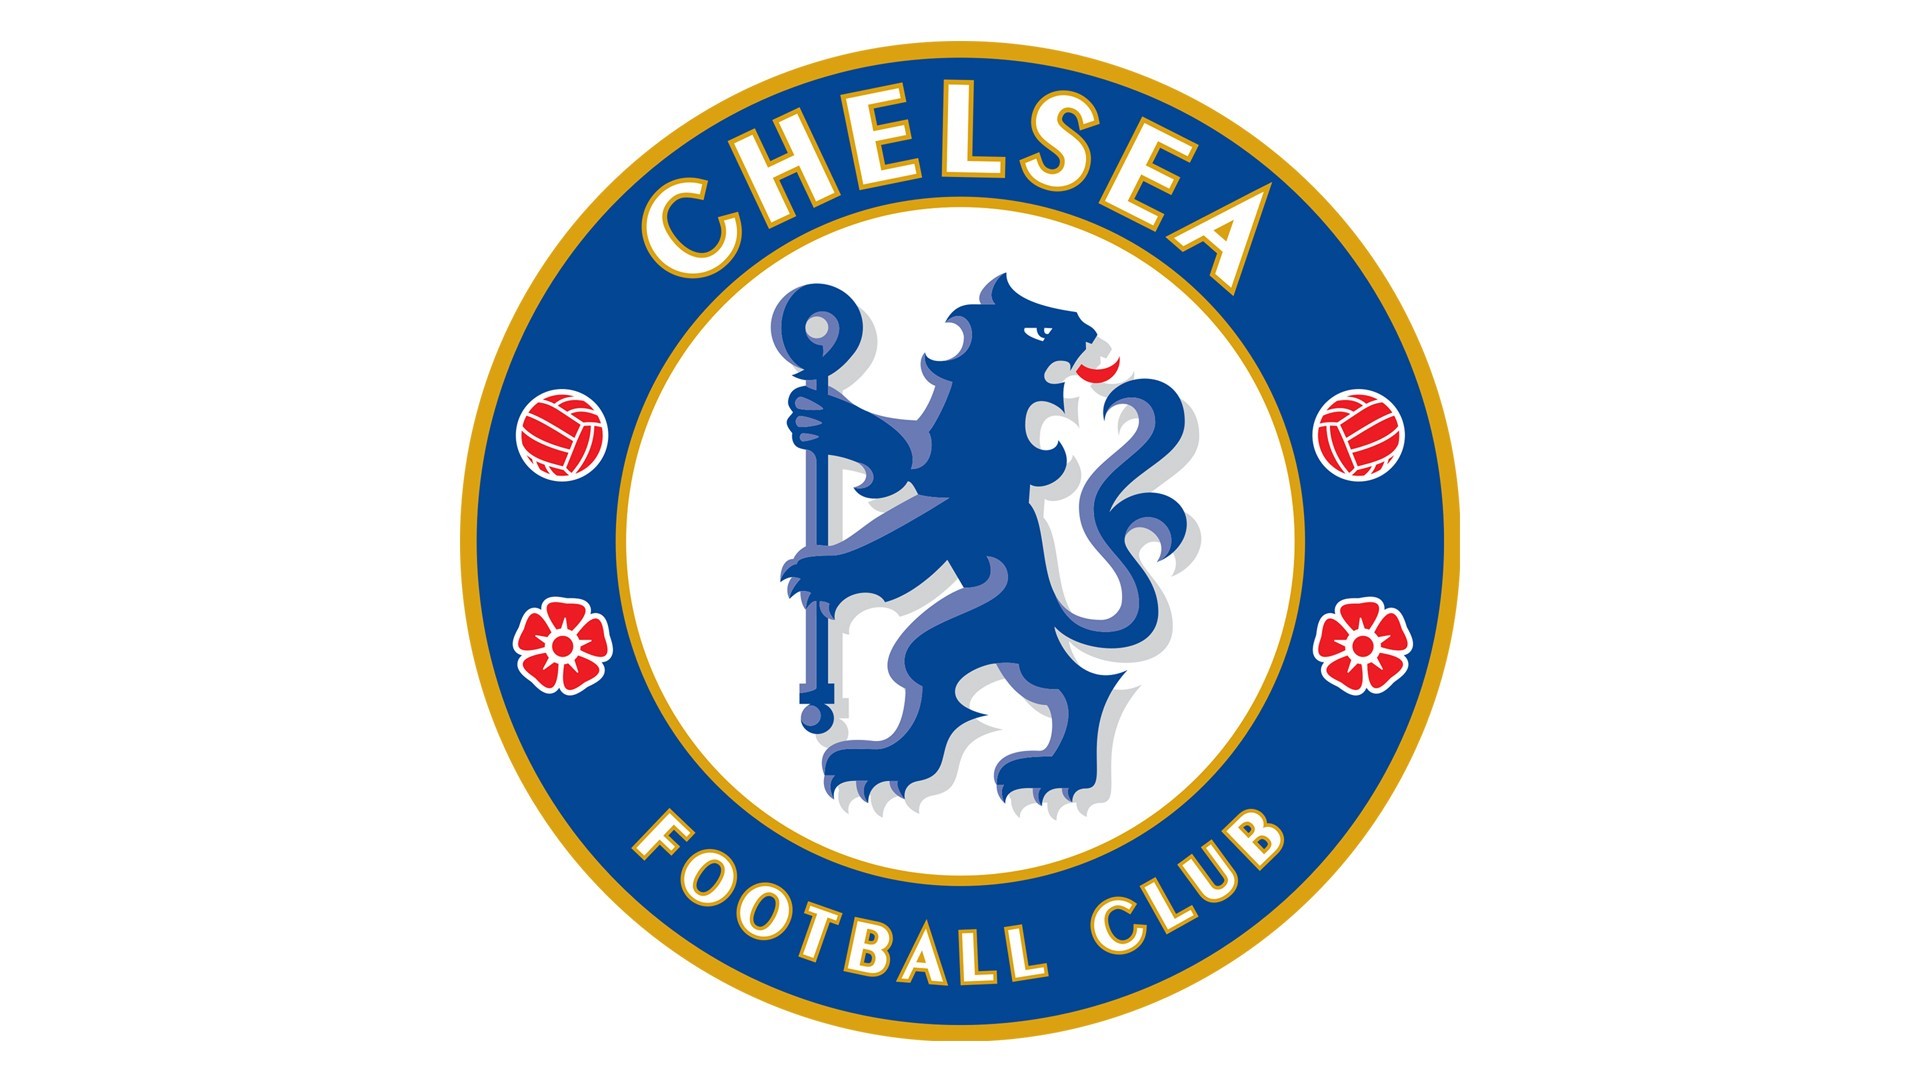 Chelsea Fc Logo Wallpaper High Resolutionwith Resolutions